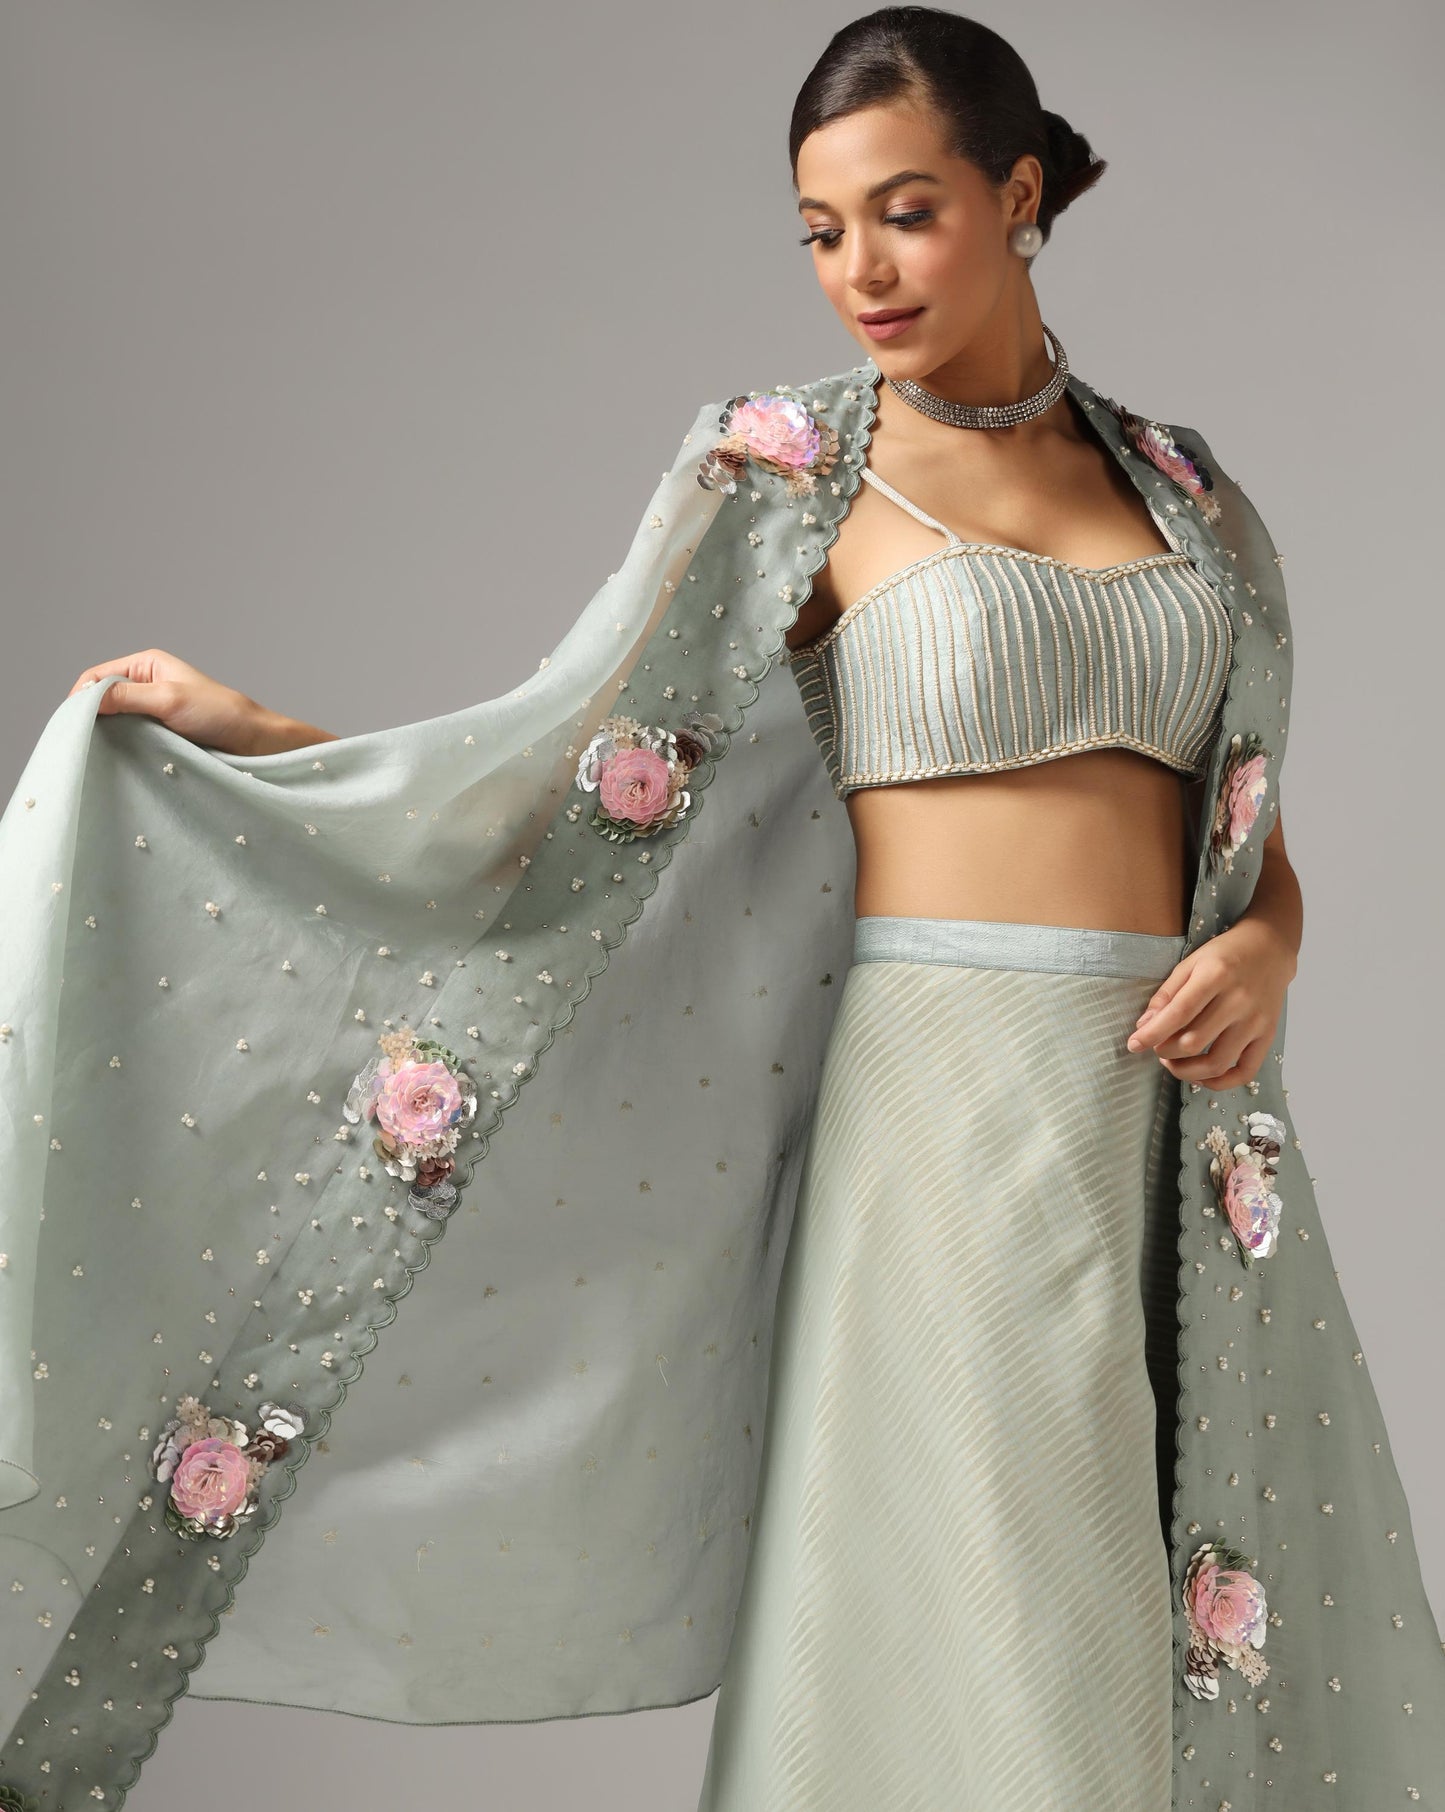 Teal Green Organza & Chiffon Embroidered Cape Set